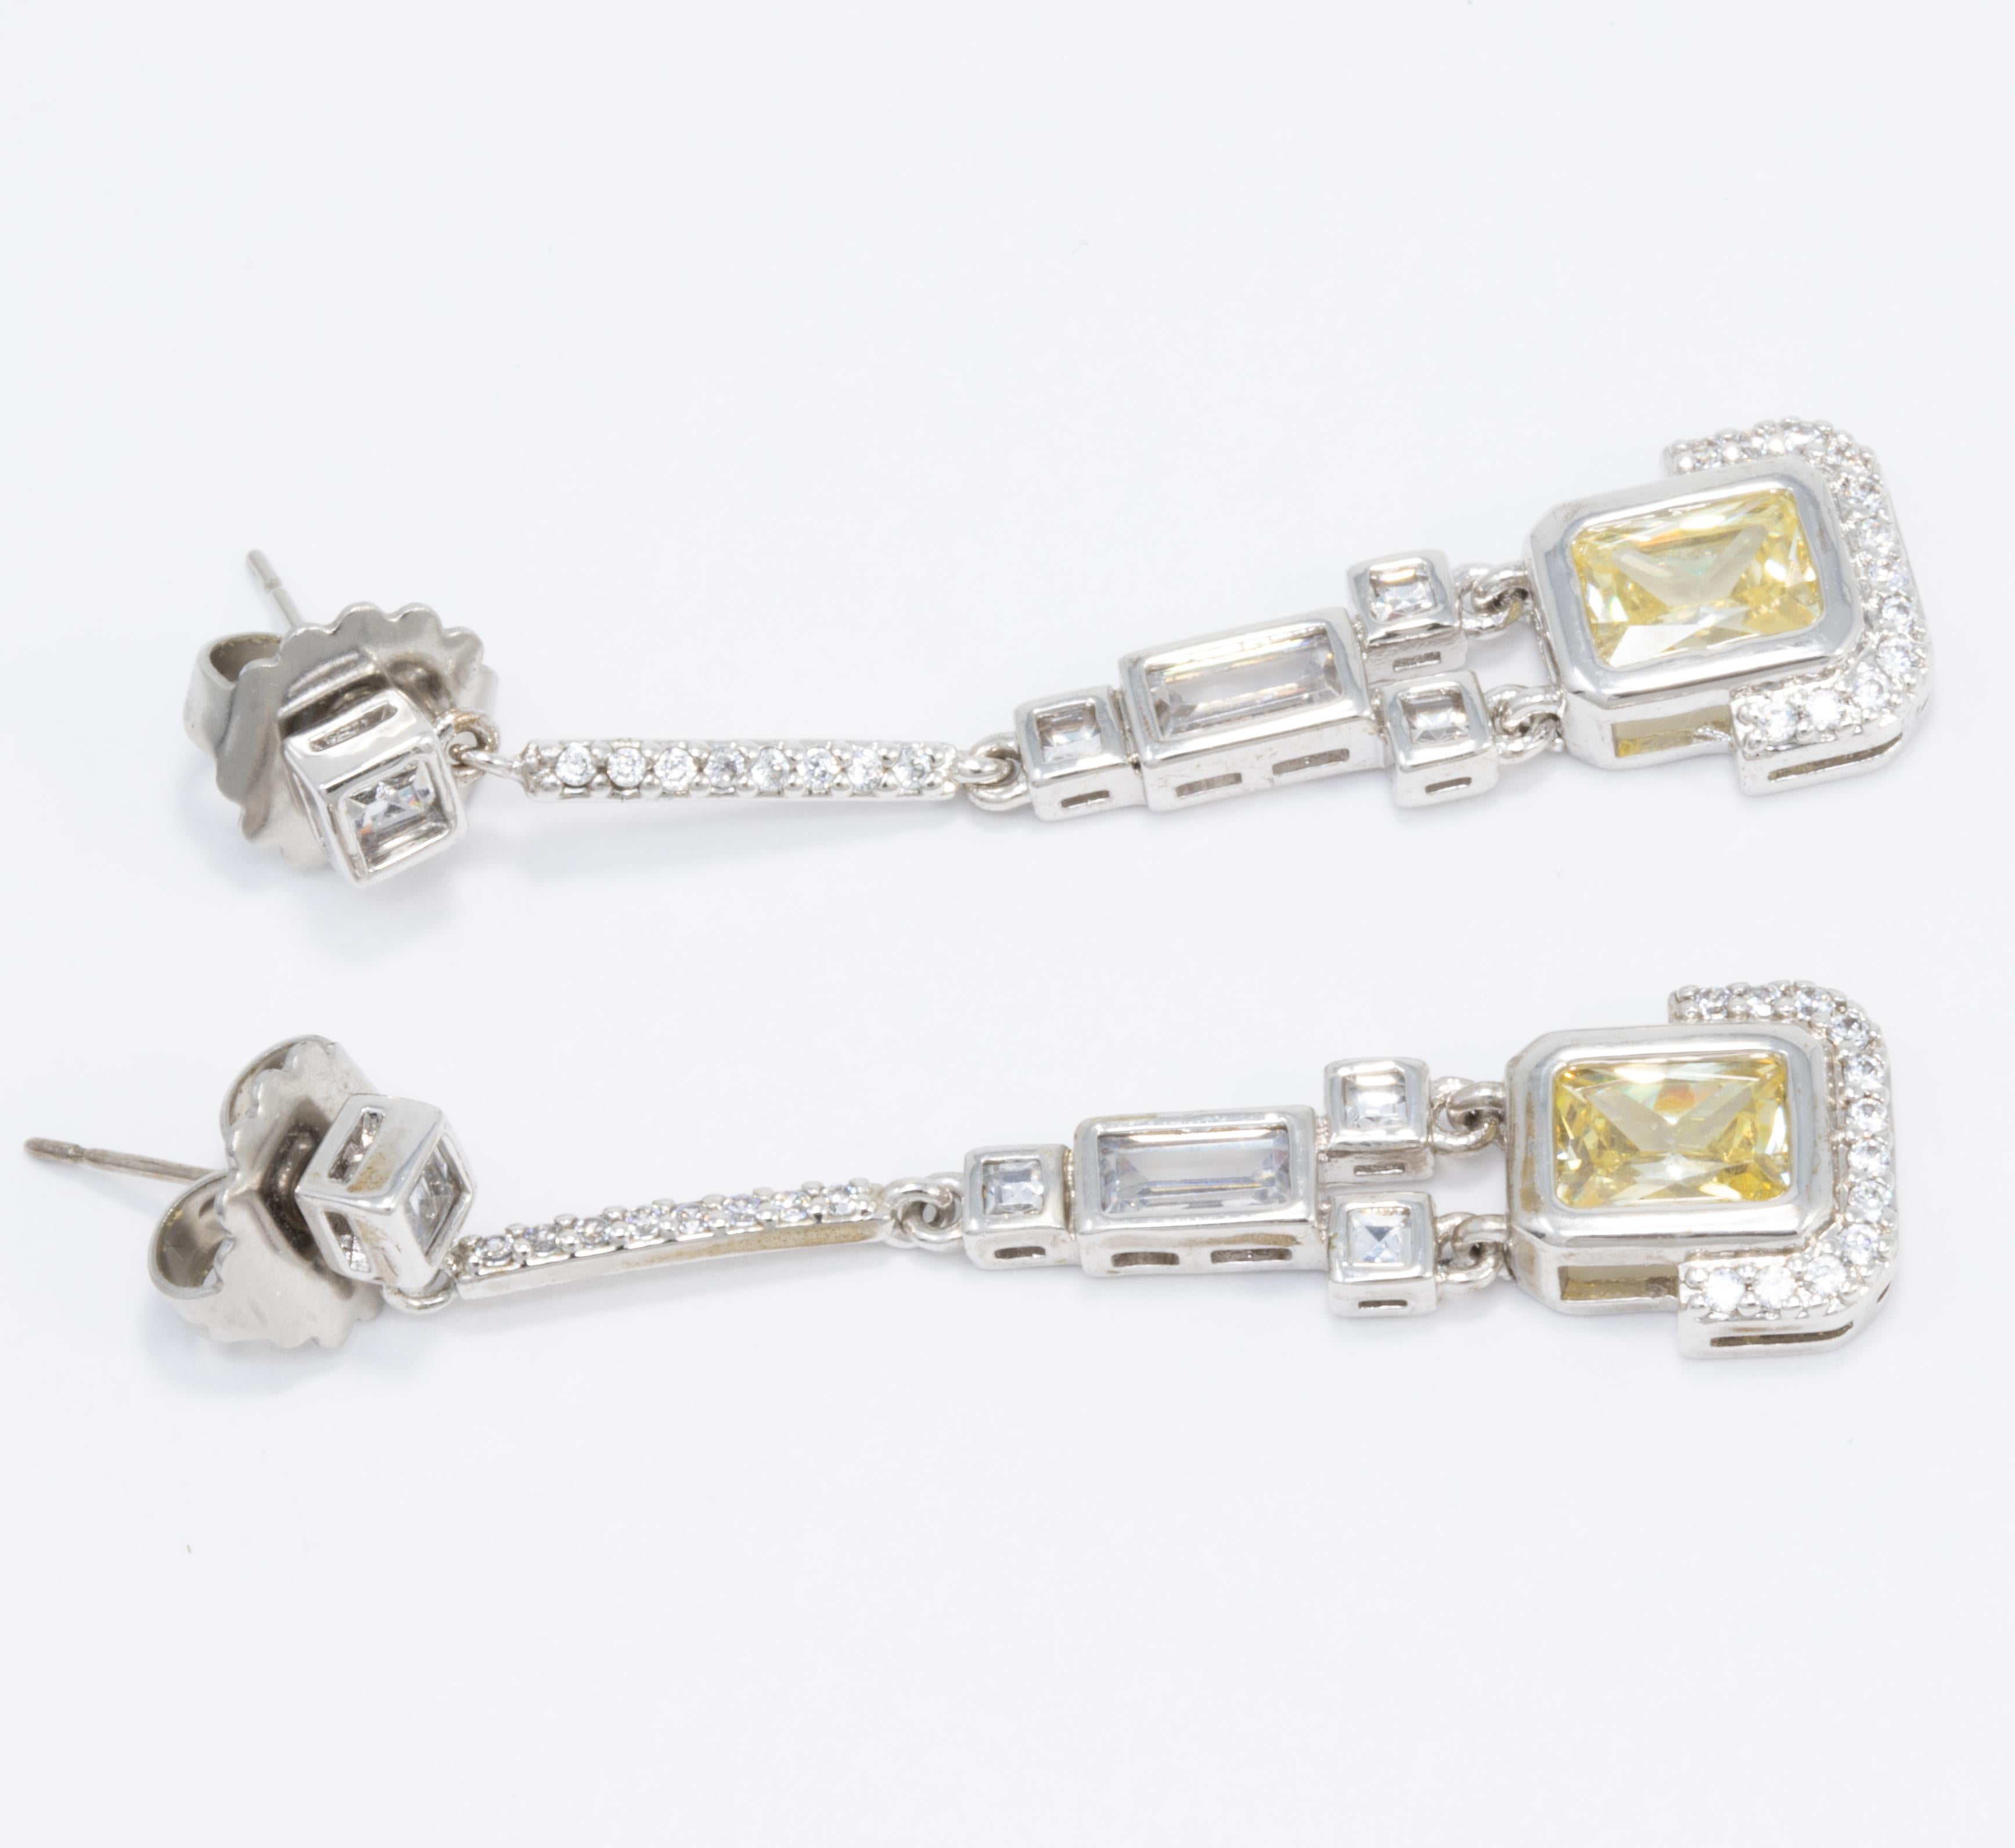 Add some sparkle to your outfit with these Art-Deco style silver tone drop earrings by Kenneth Jay Lane.

Clear and jonquil cubic zirconia crystals. Post backs.

Marks/Hallmarks: KJL

CZ by Kenneth Jay Lane line. Designed in New York. Made in China.